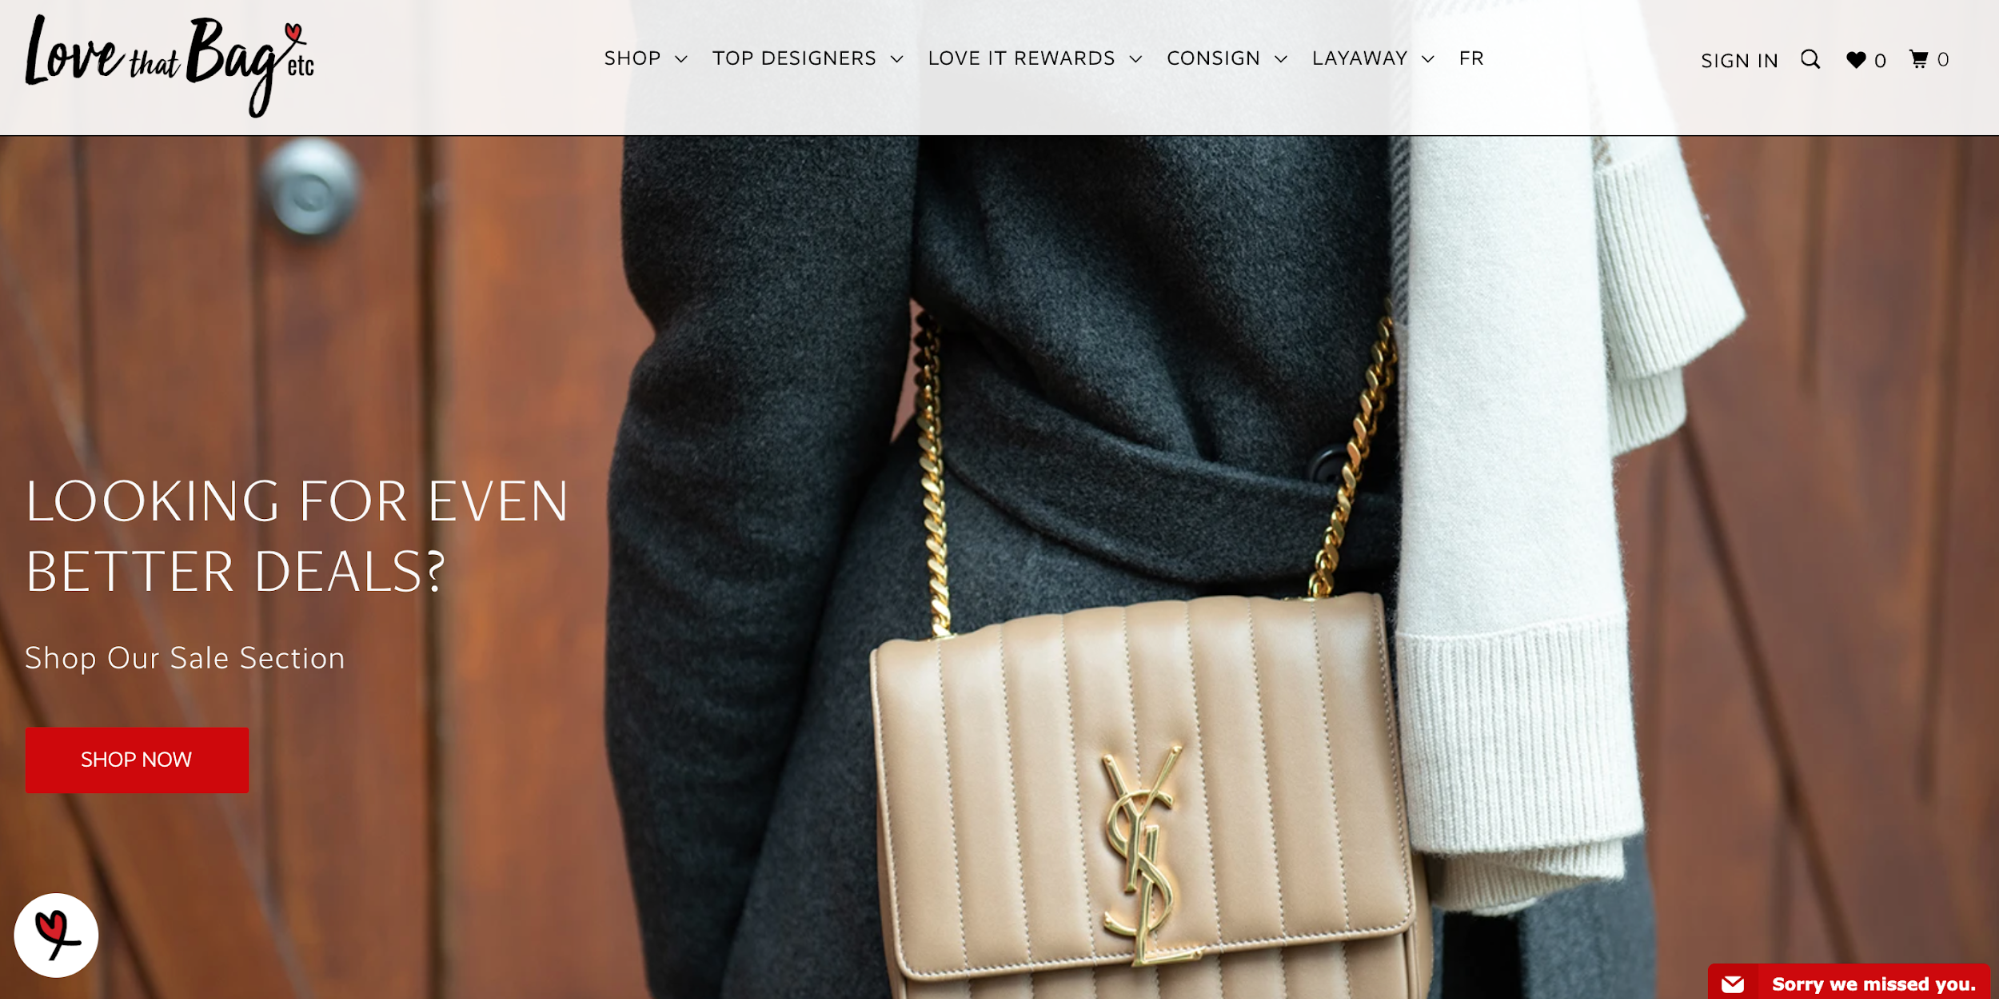 Love that Bag etc. homepage that features one of its high-end purses